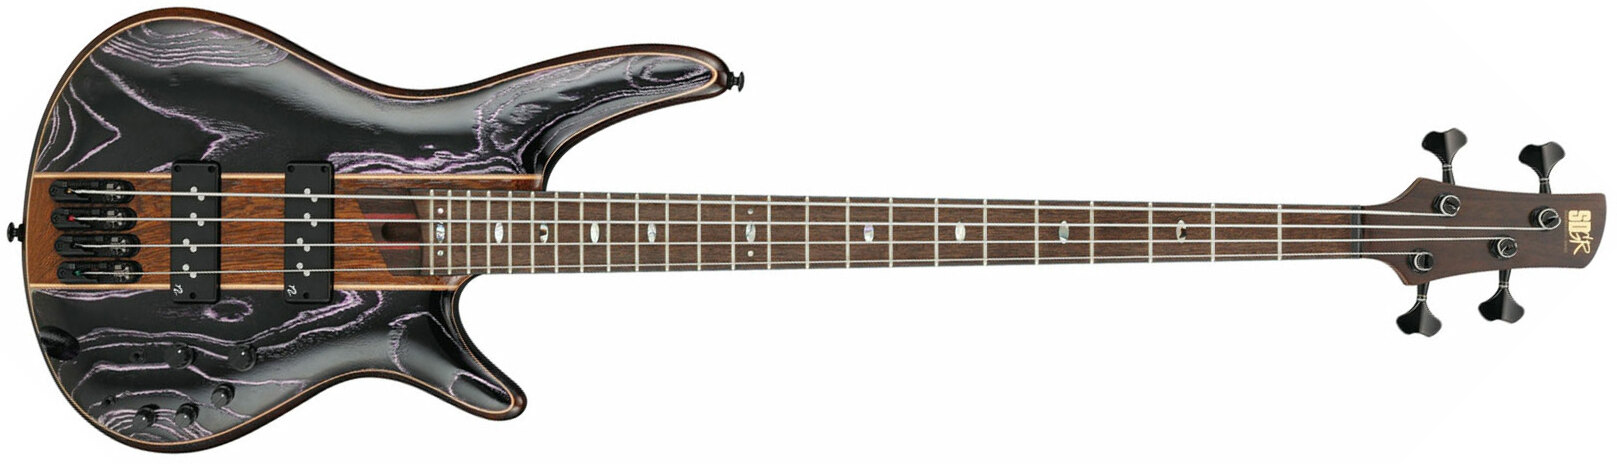 Ibanez Sr1300sb Mgl Premium Active Pp - Magic Wave Low Gloss - Solidbody E-bass - Main picture